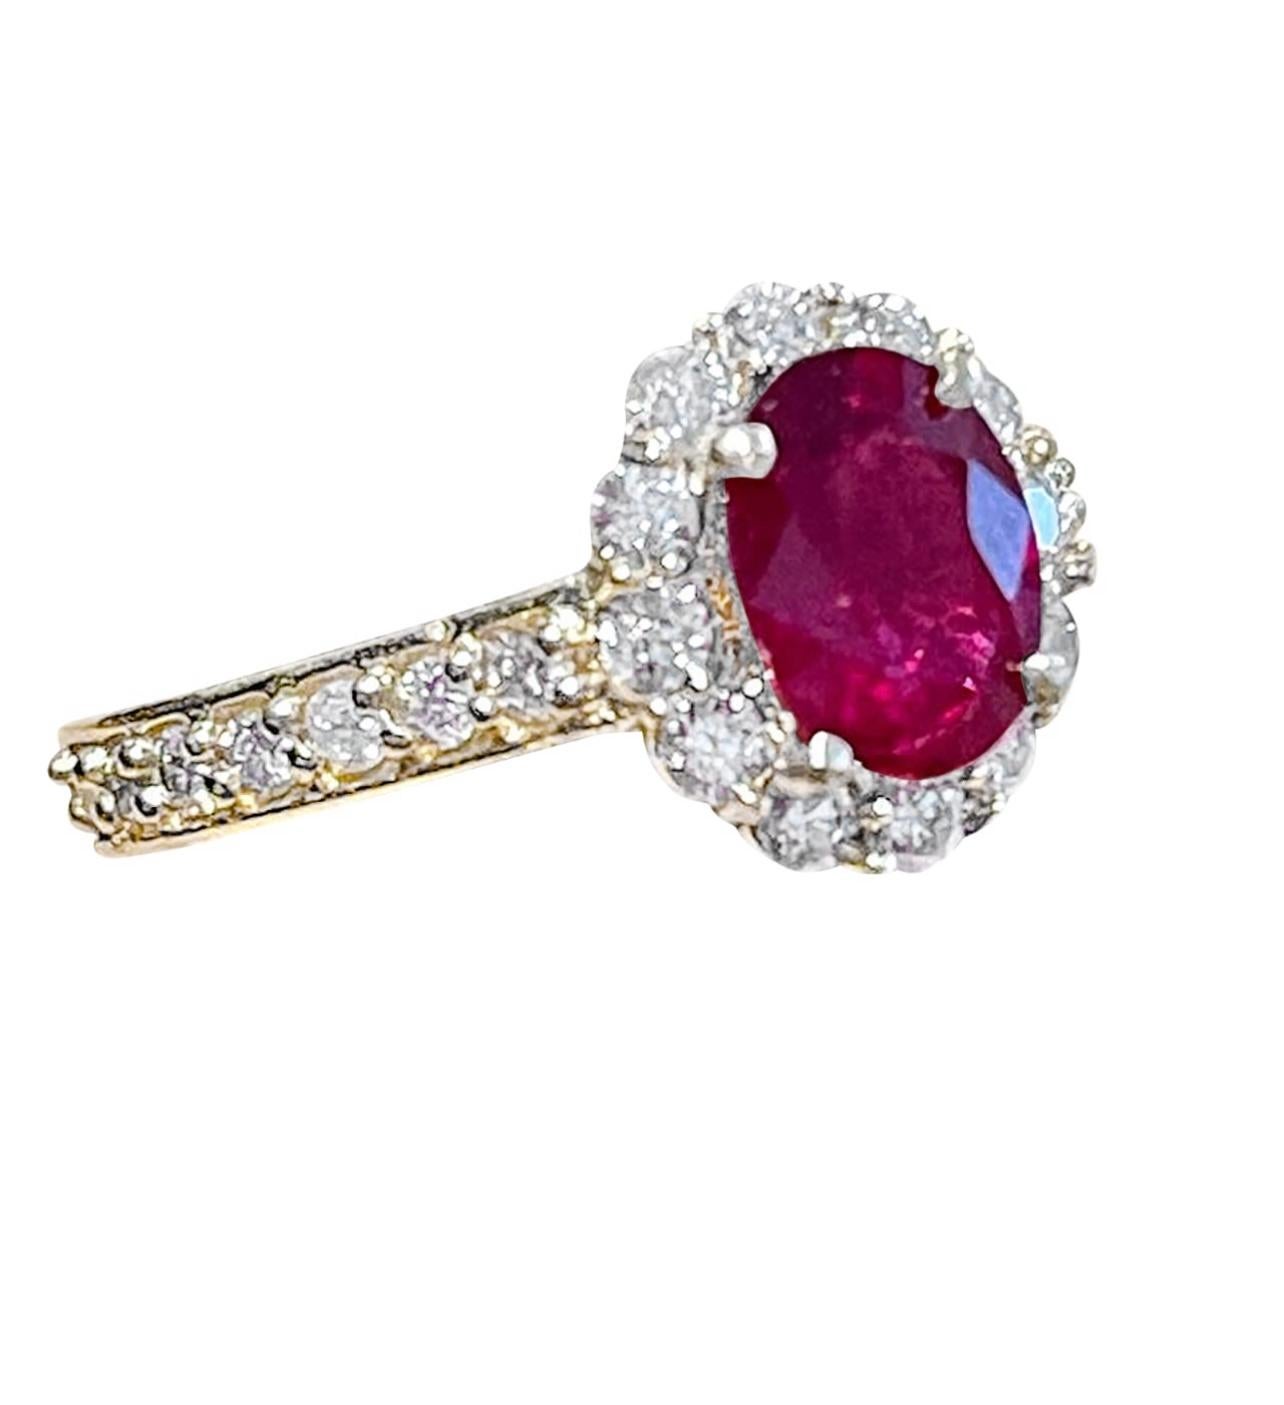 Women's Oval 1.5 Carat Treated Ruby and 1.20 Carat Diamond 14 Karat Yellow Gold Ring For Sale